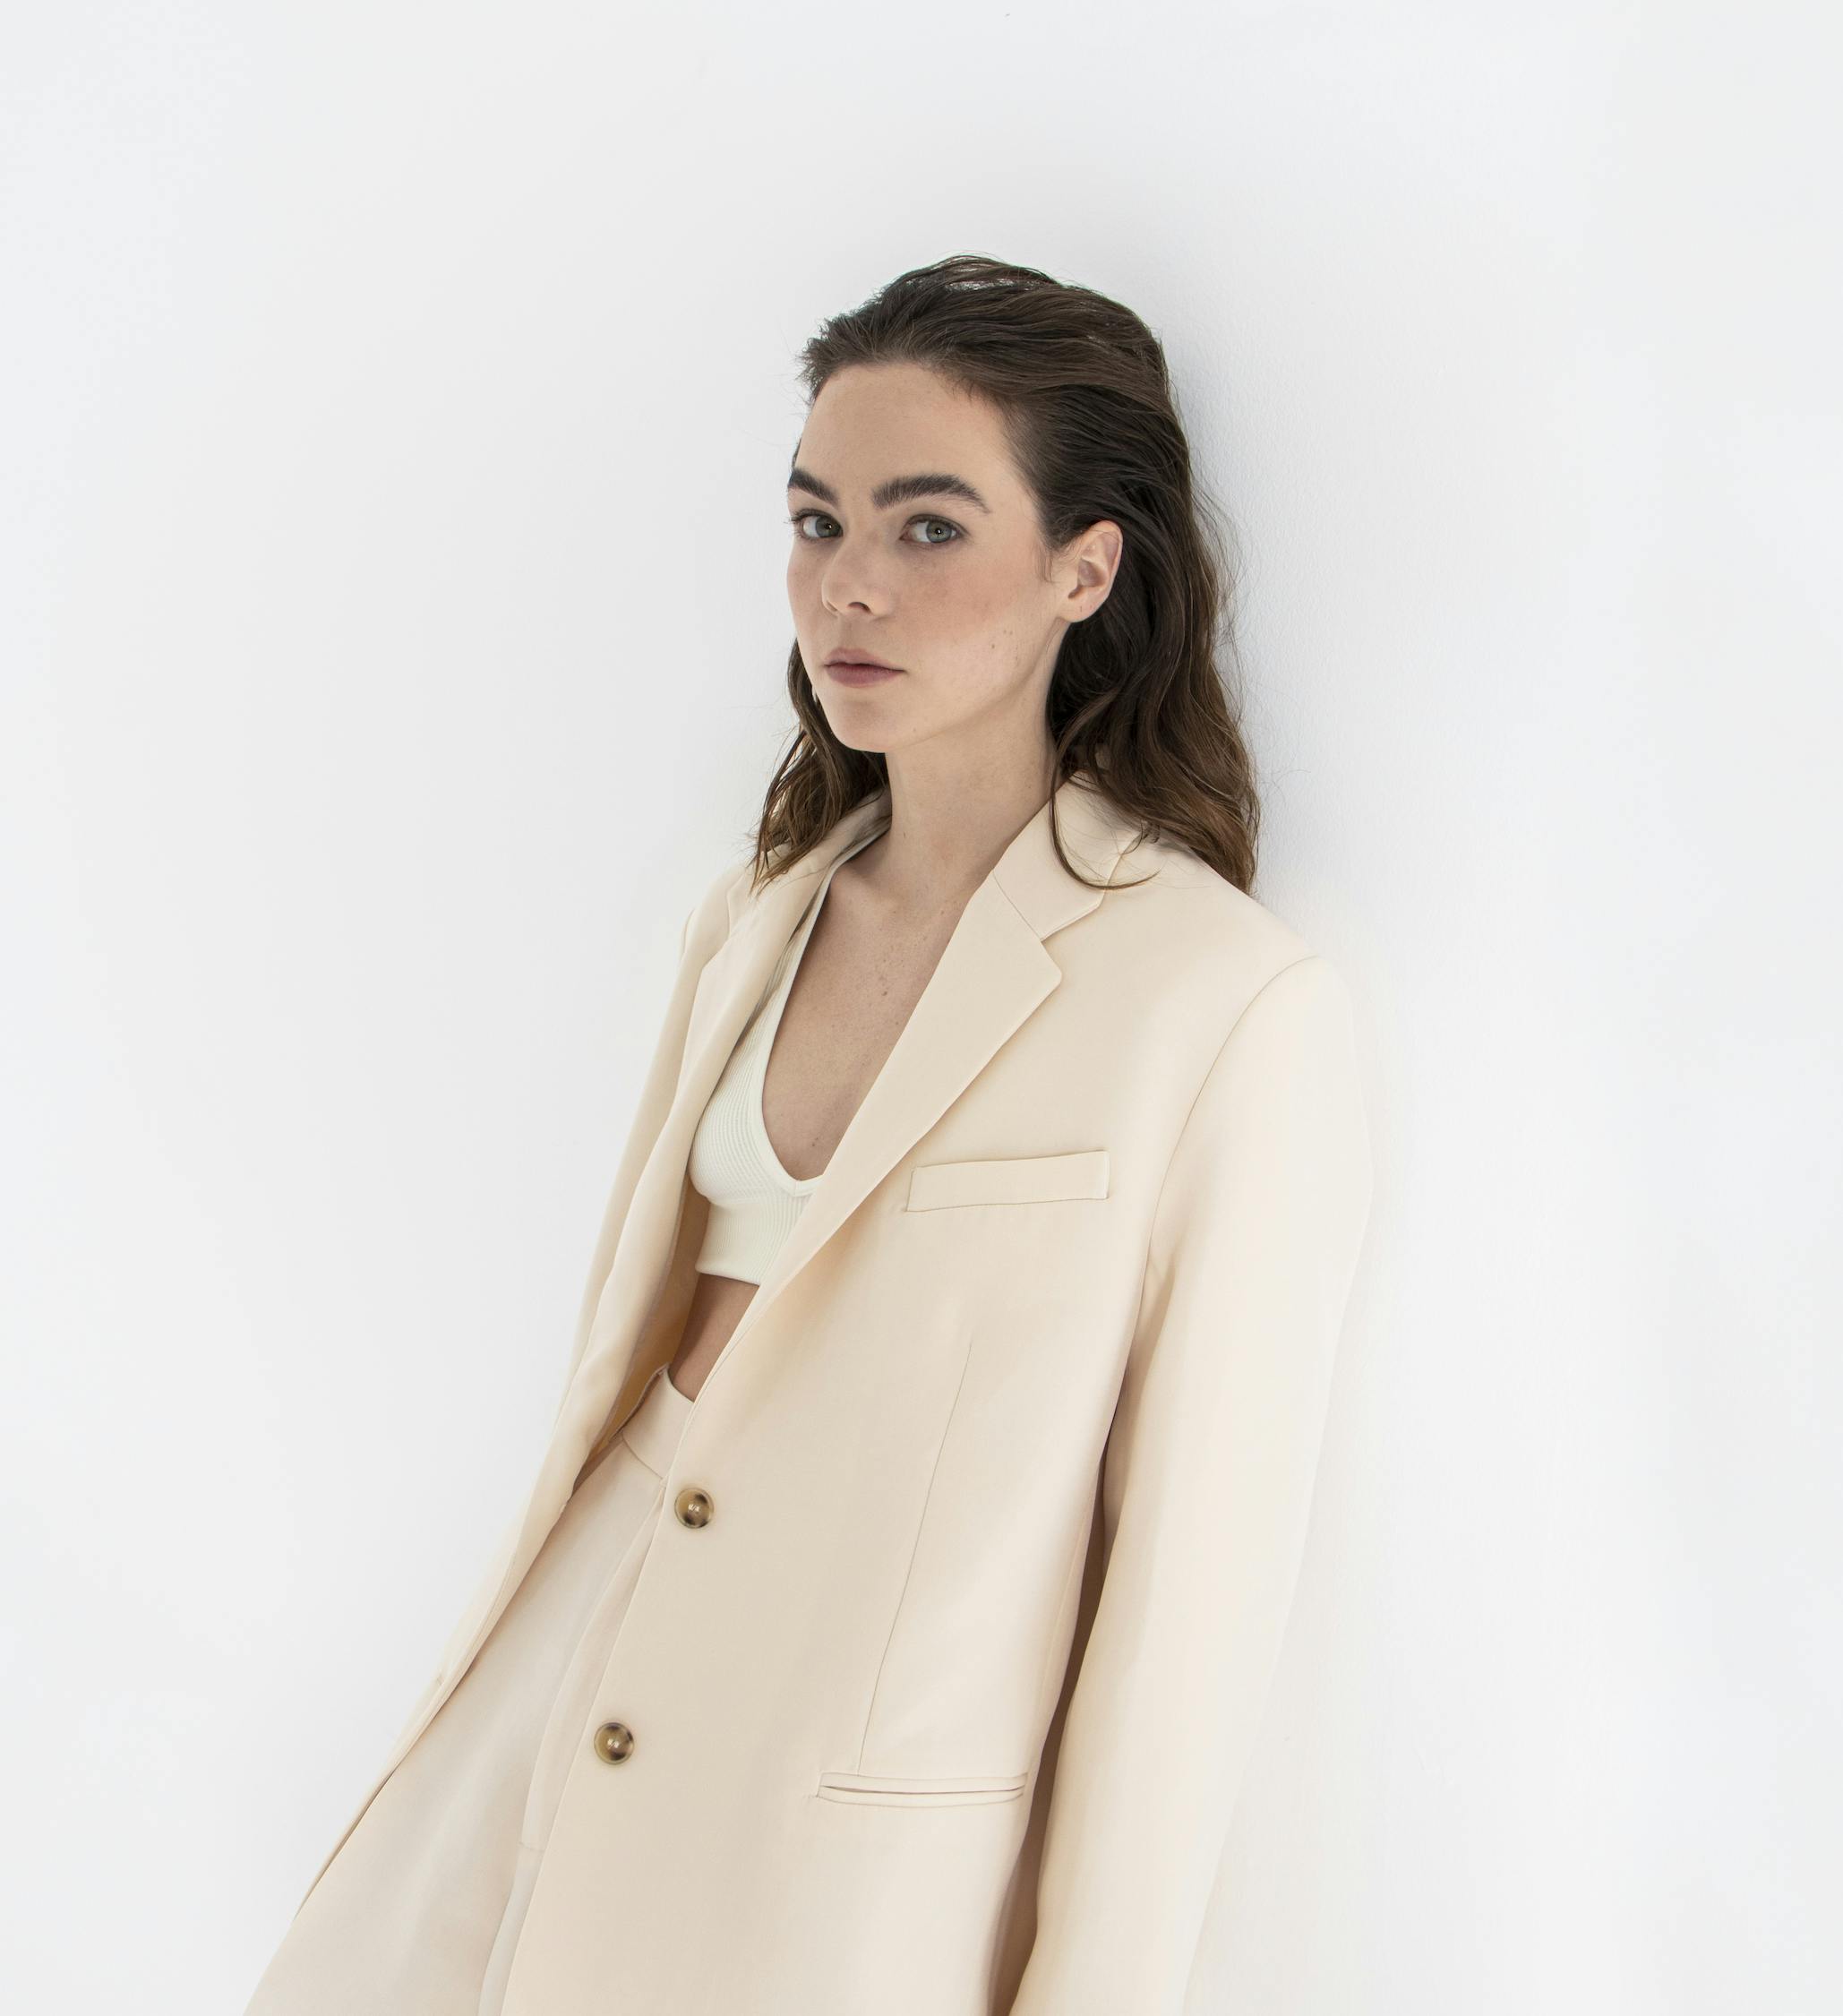 Ximena Lamadrid wears a beige suit and white top.